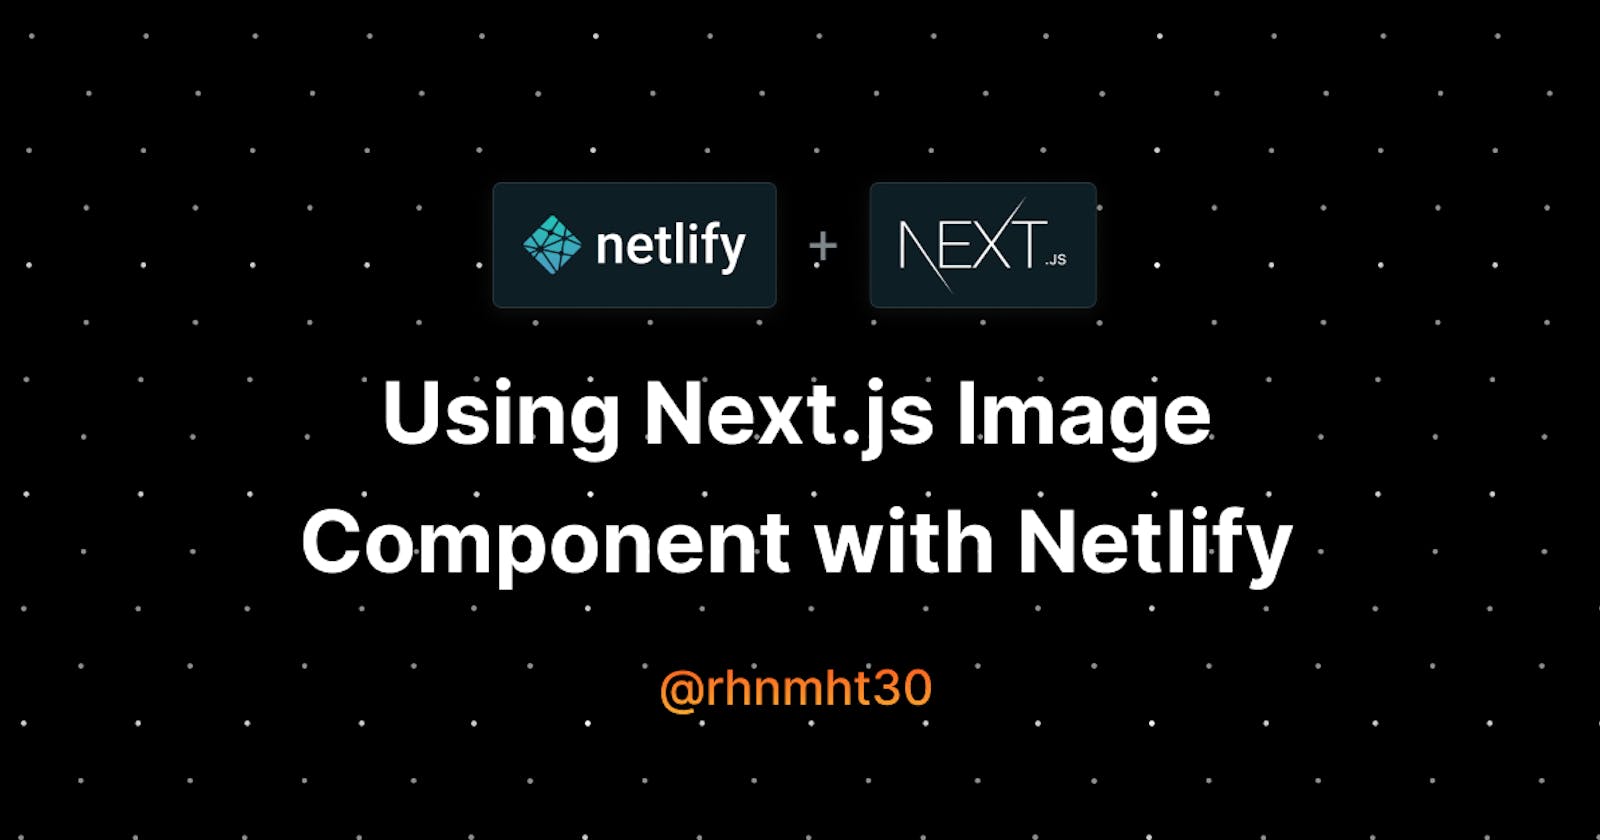 Using Next.js Image Component with Netlify